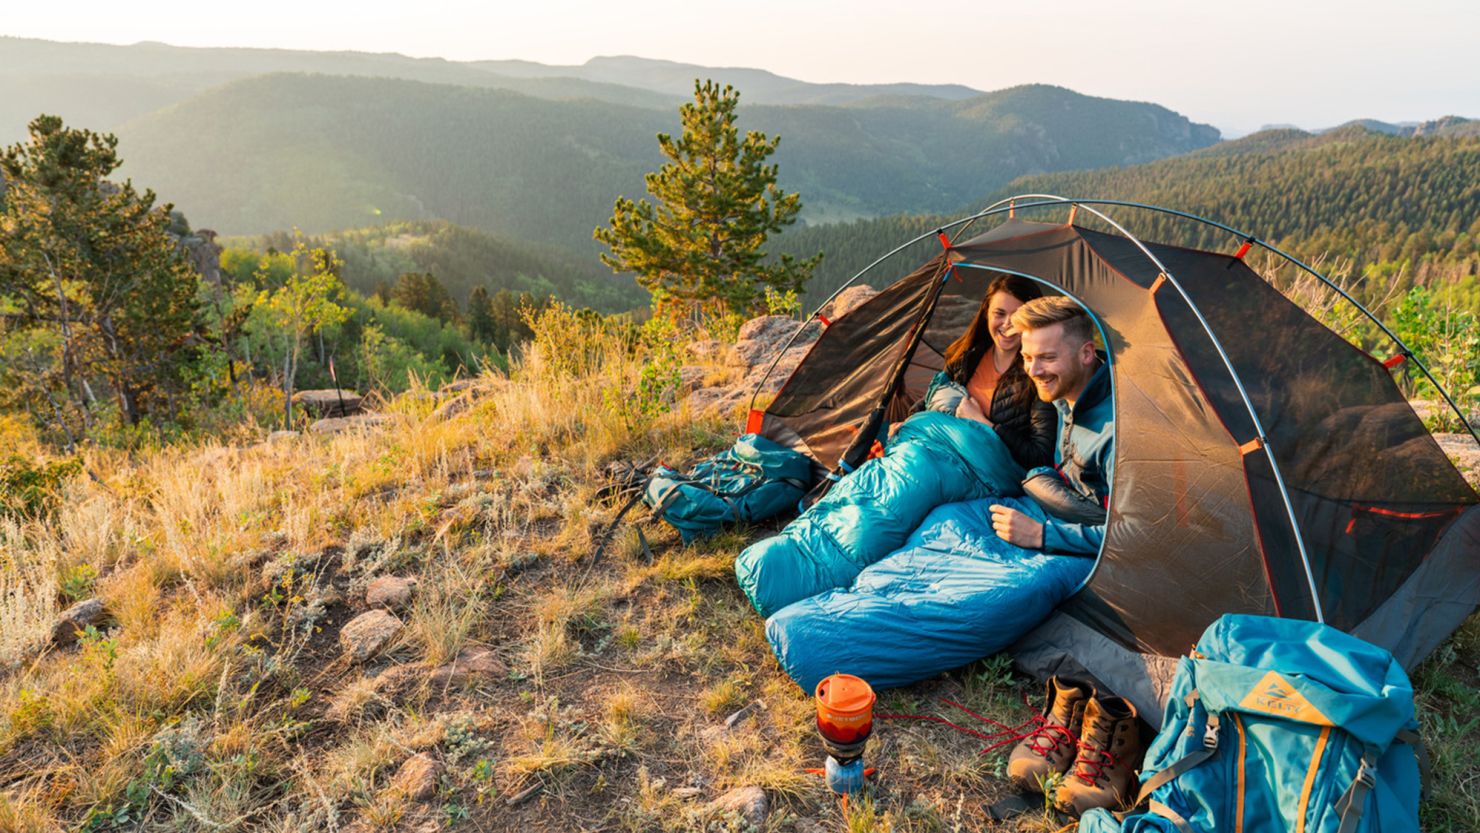 The Best Gear and Gadgets for Summer Camping